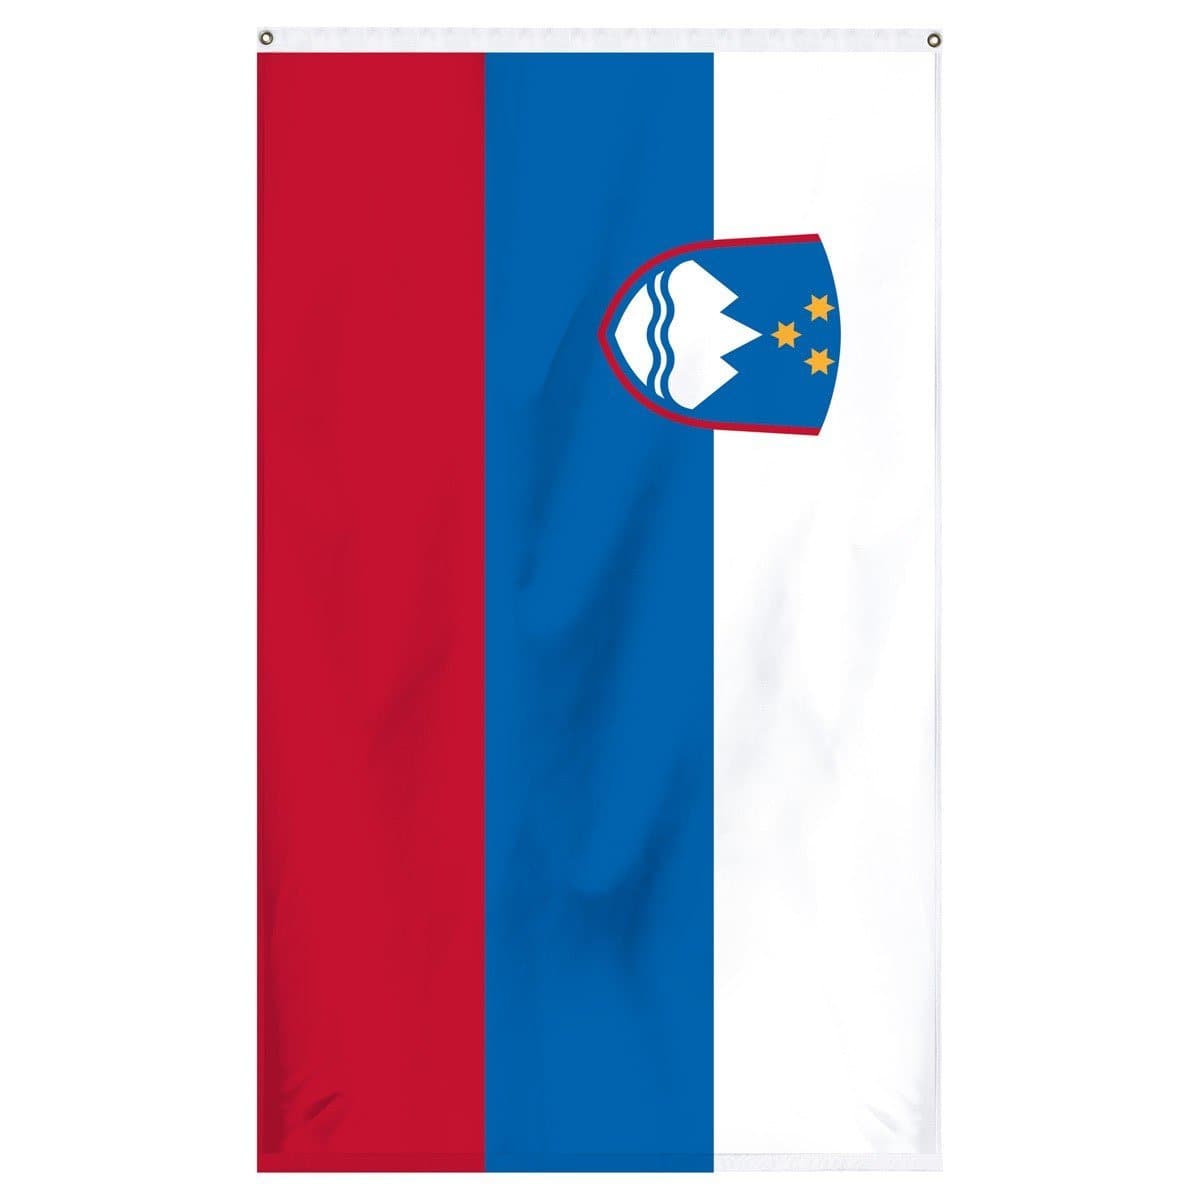 Slovenia National flag for sale to buy online from Atlantic Flag and Pole